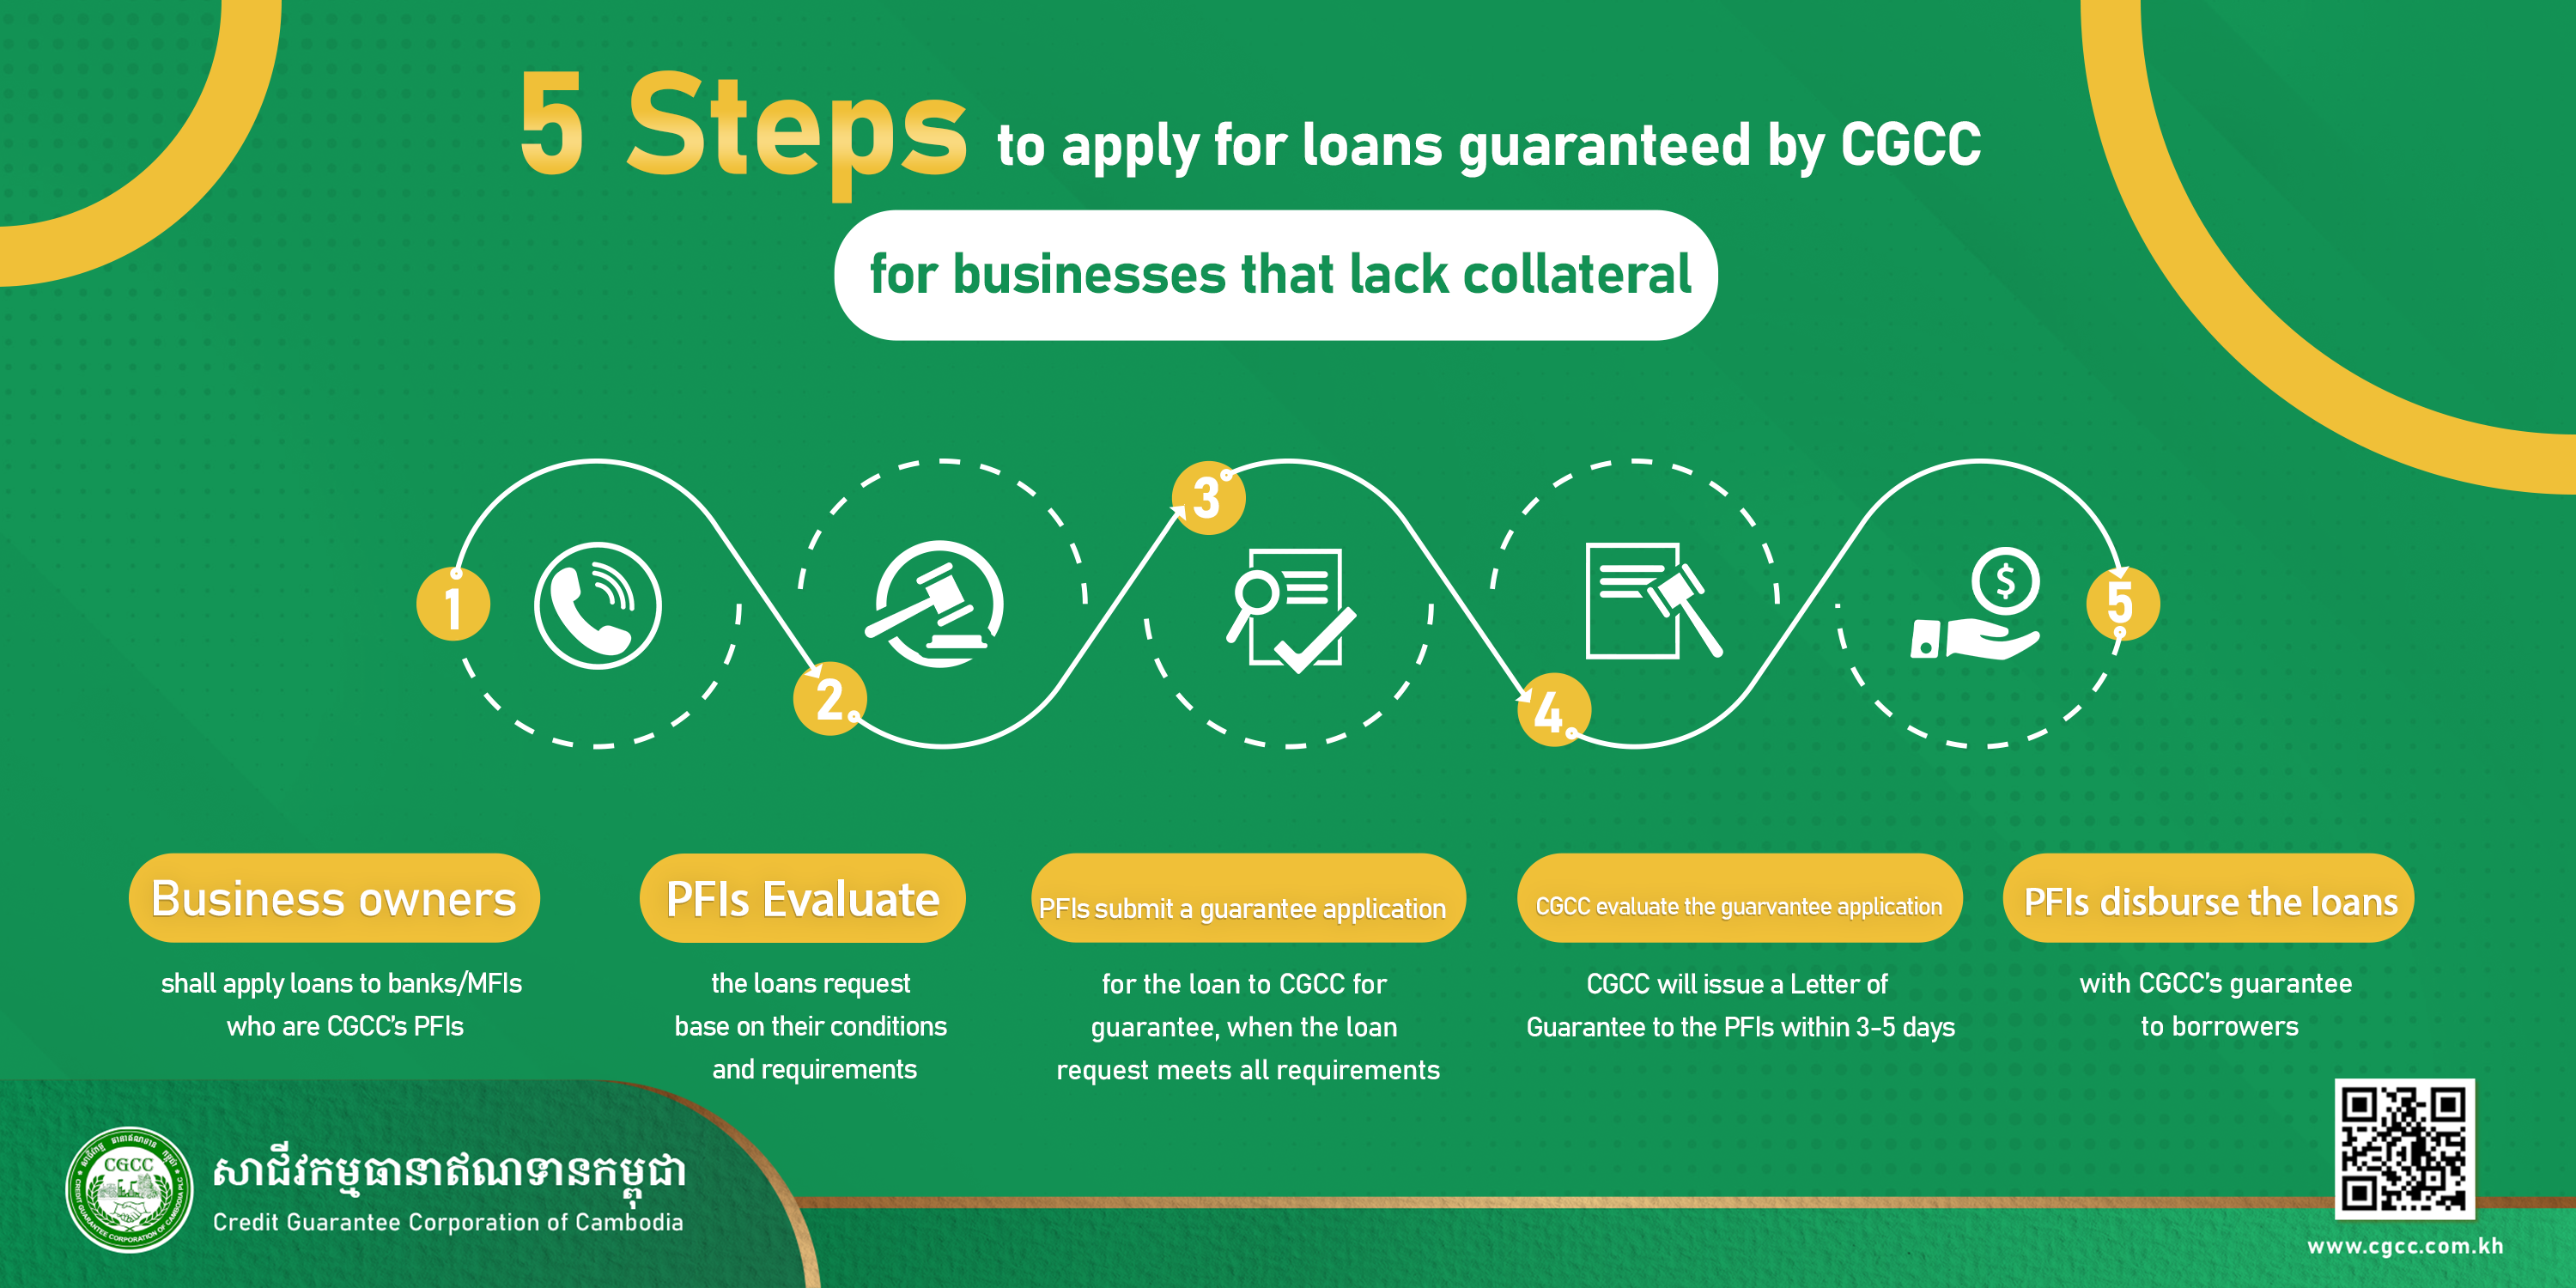 How to apply for guaranteed loan with CGCC